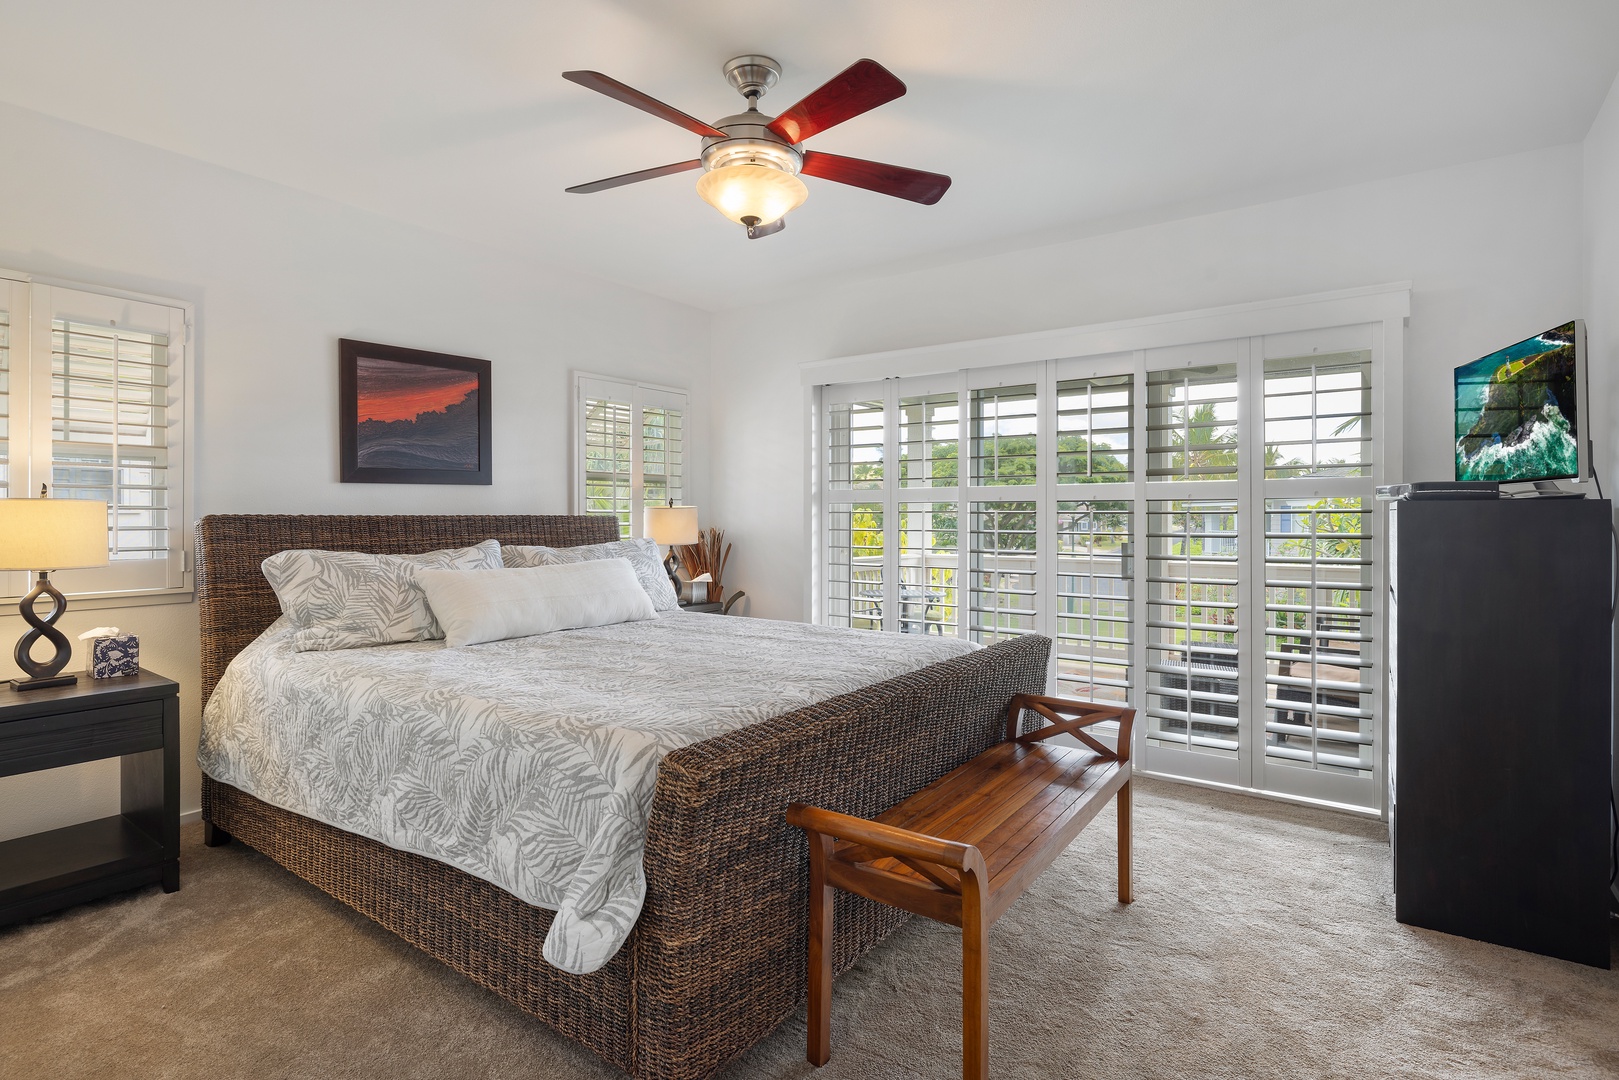 Kapolei Vacation Rentals, Coconut Plantation 1190-1 - The primary guest bedroom with lovely views and ceiling fan.